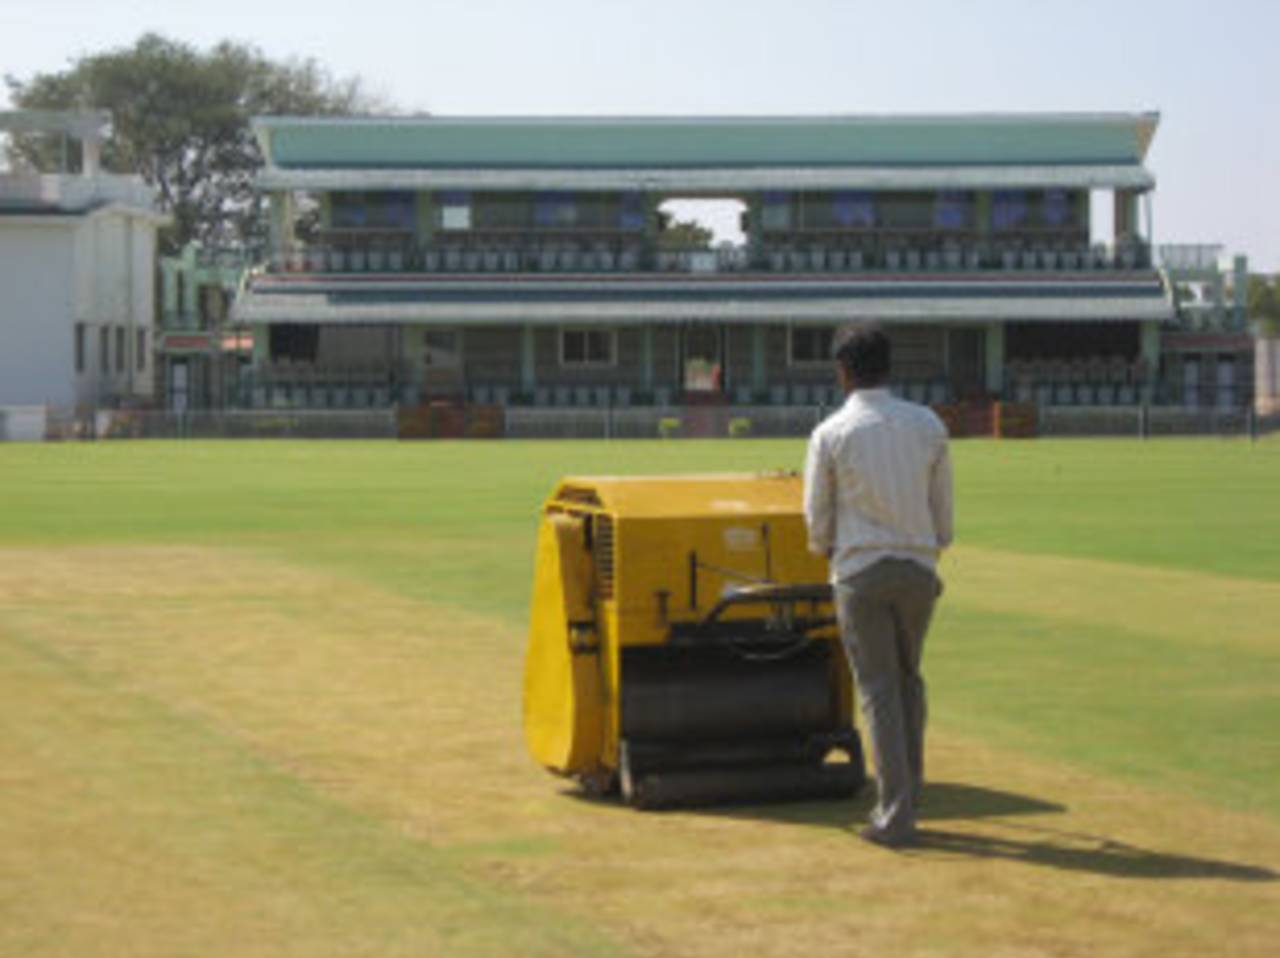 Even pitches without a strand of grass are mowed every single day&nbsp;&nbsp;&bull;&nbsp;&nbsp;Sharda Ugra/ESPNcricinfo Ltd